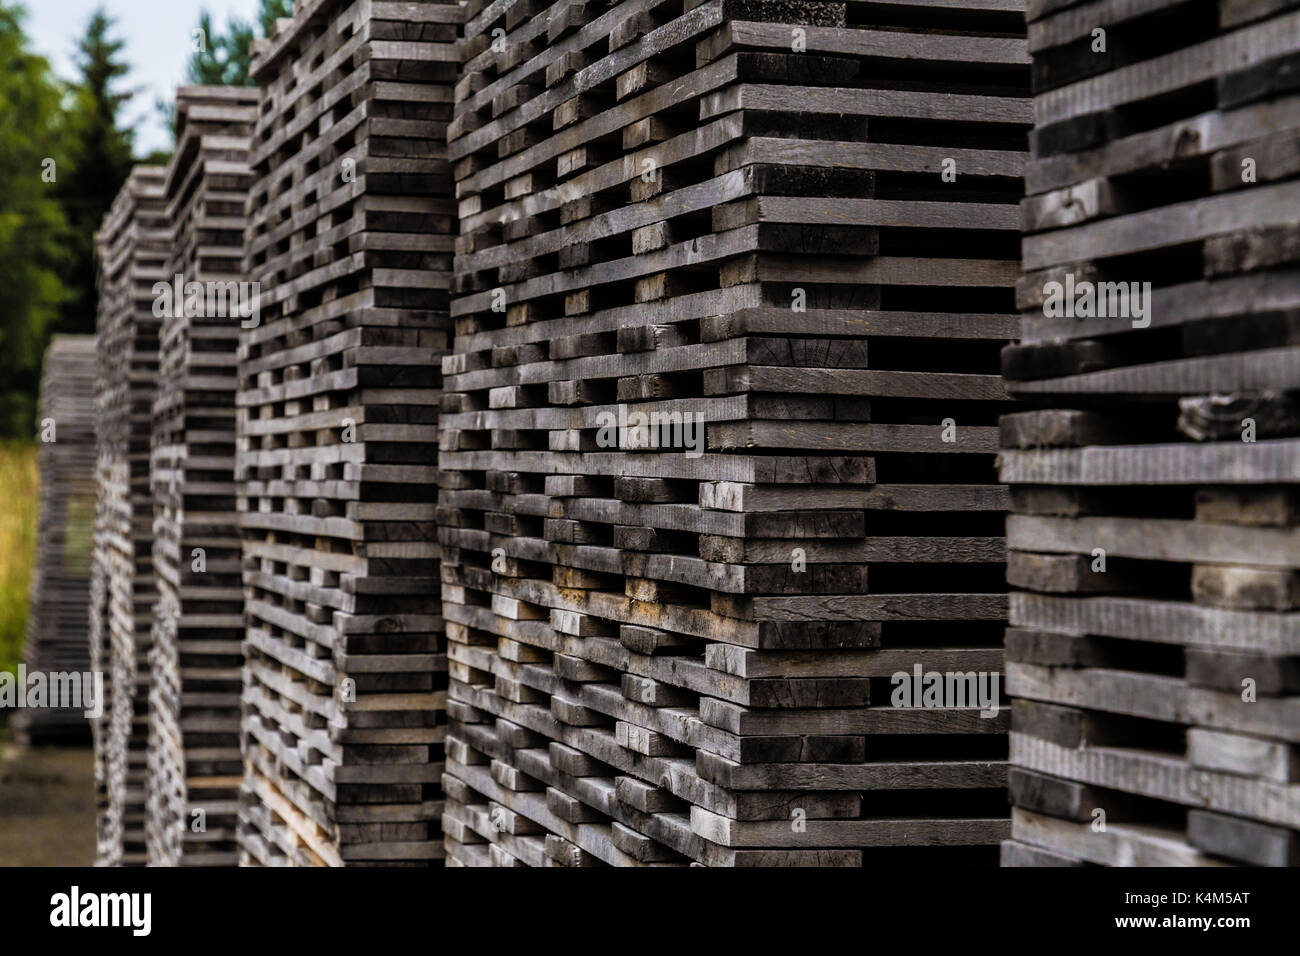 Pile of decayed lumber stacked on top each other Stock Photo